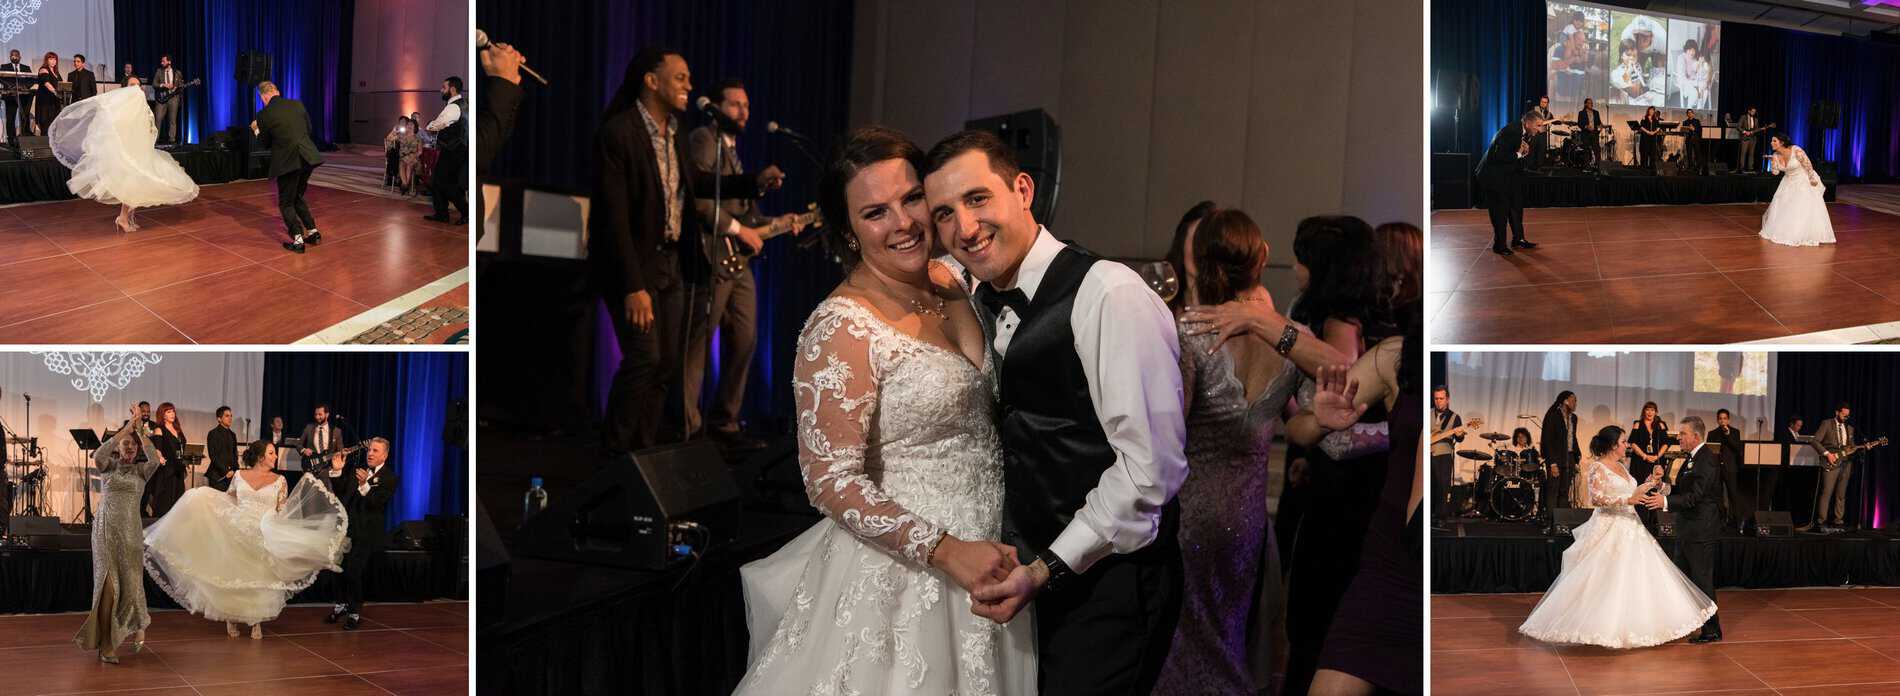 Bride and Groom dance for the first time at Disney Swan and Dolphin Ballroom